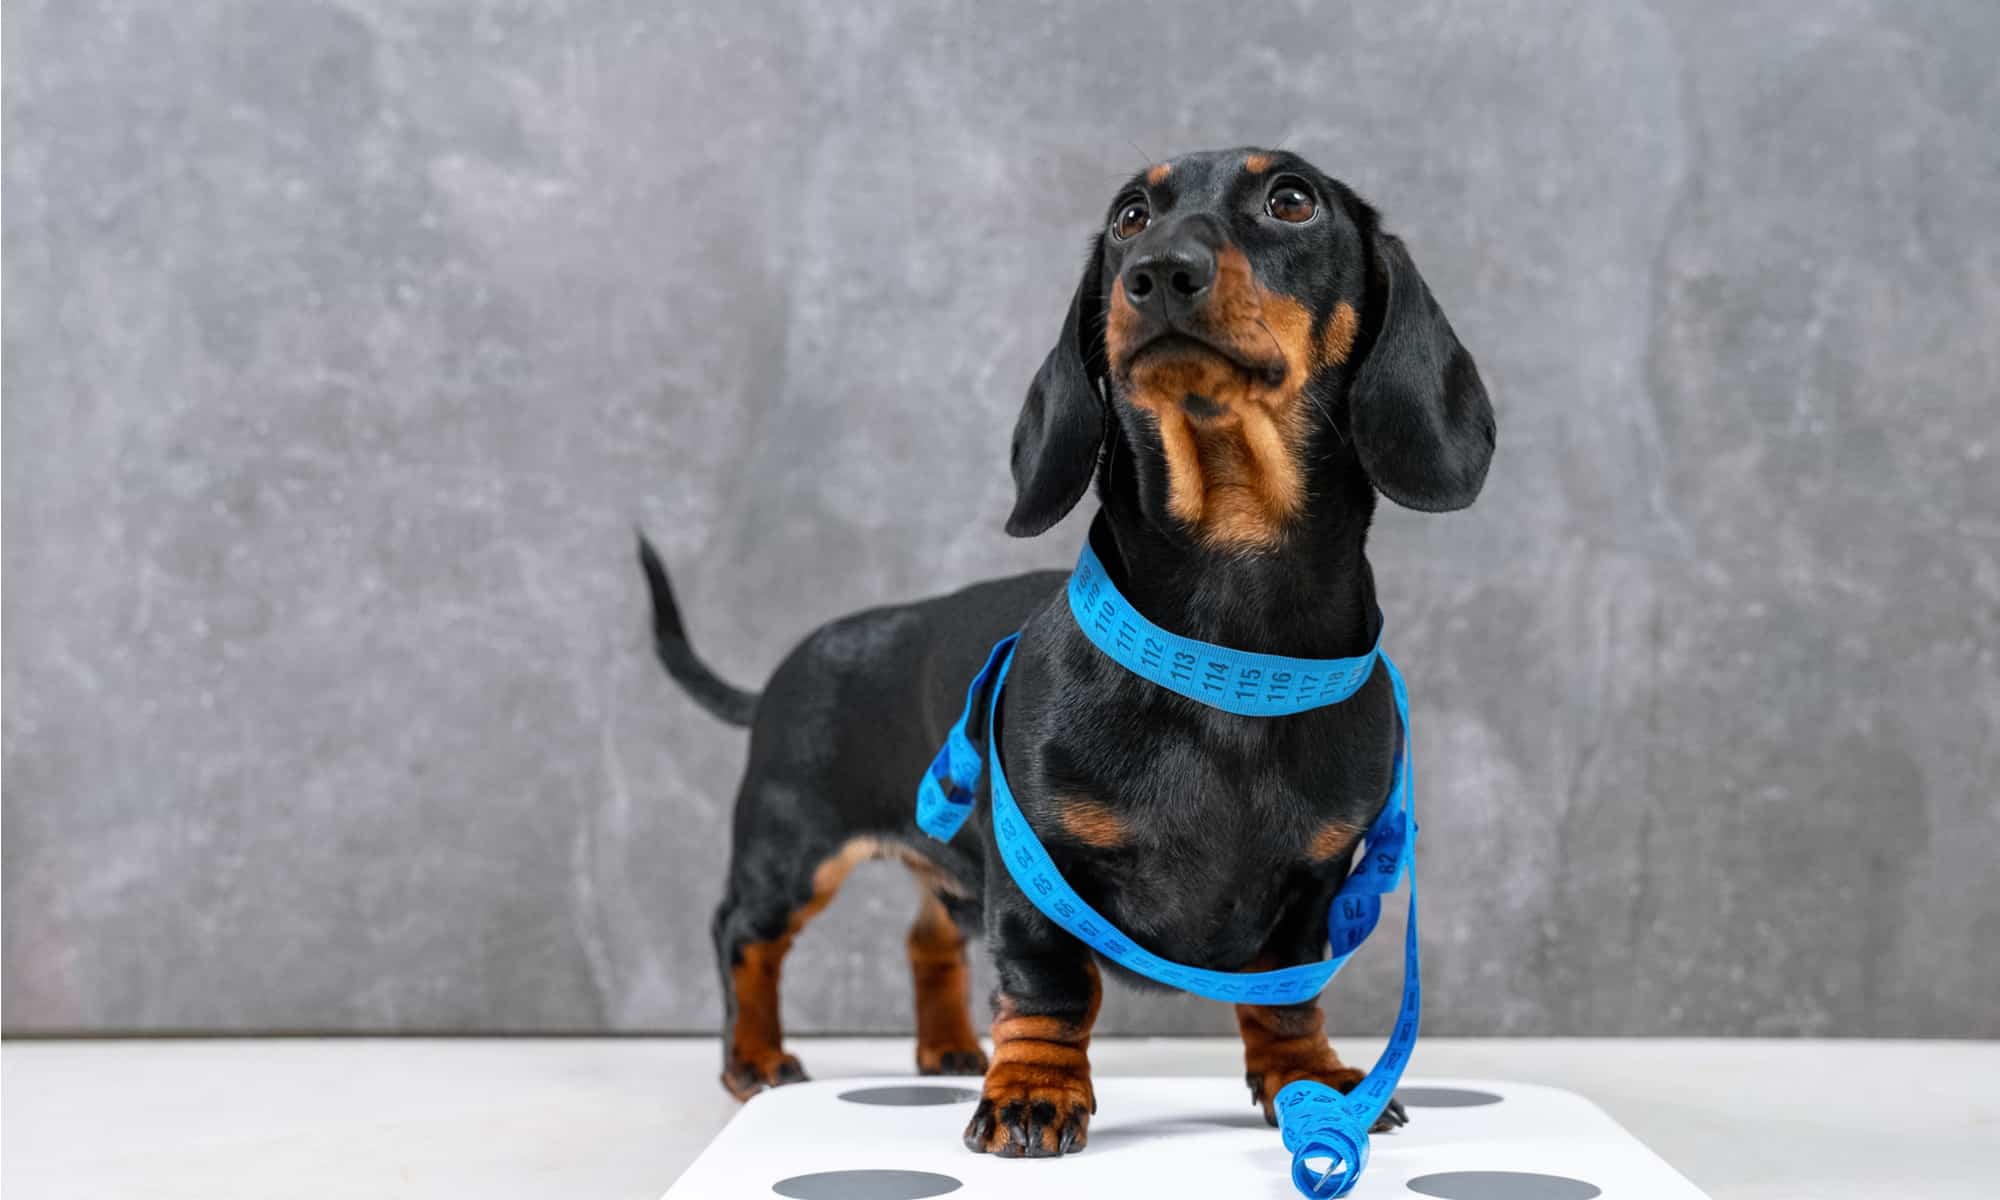 A Daschund stands on a scale waiting to get weighed.